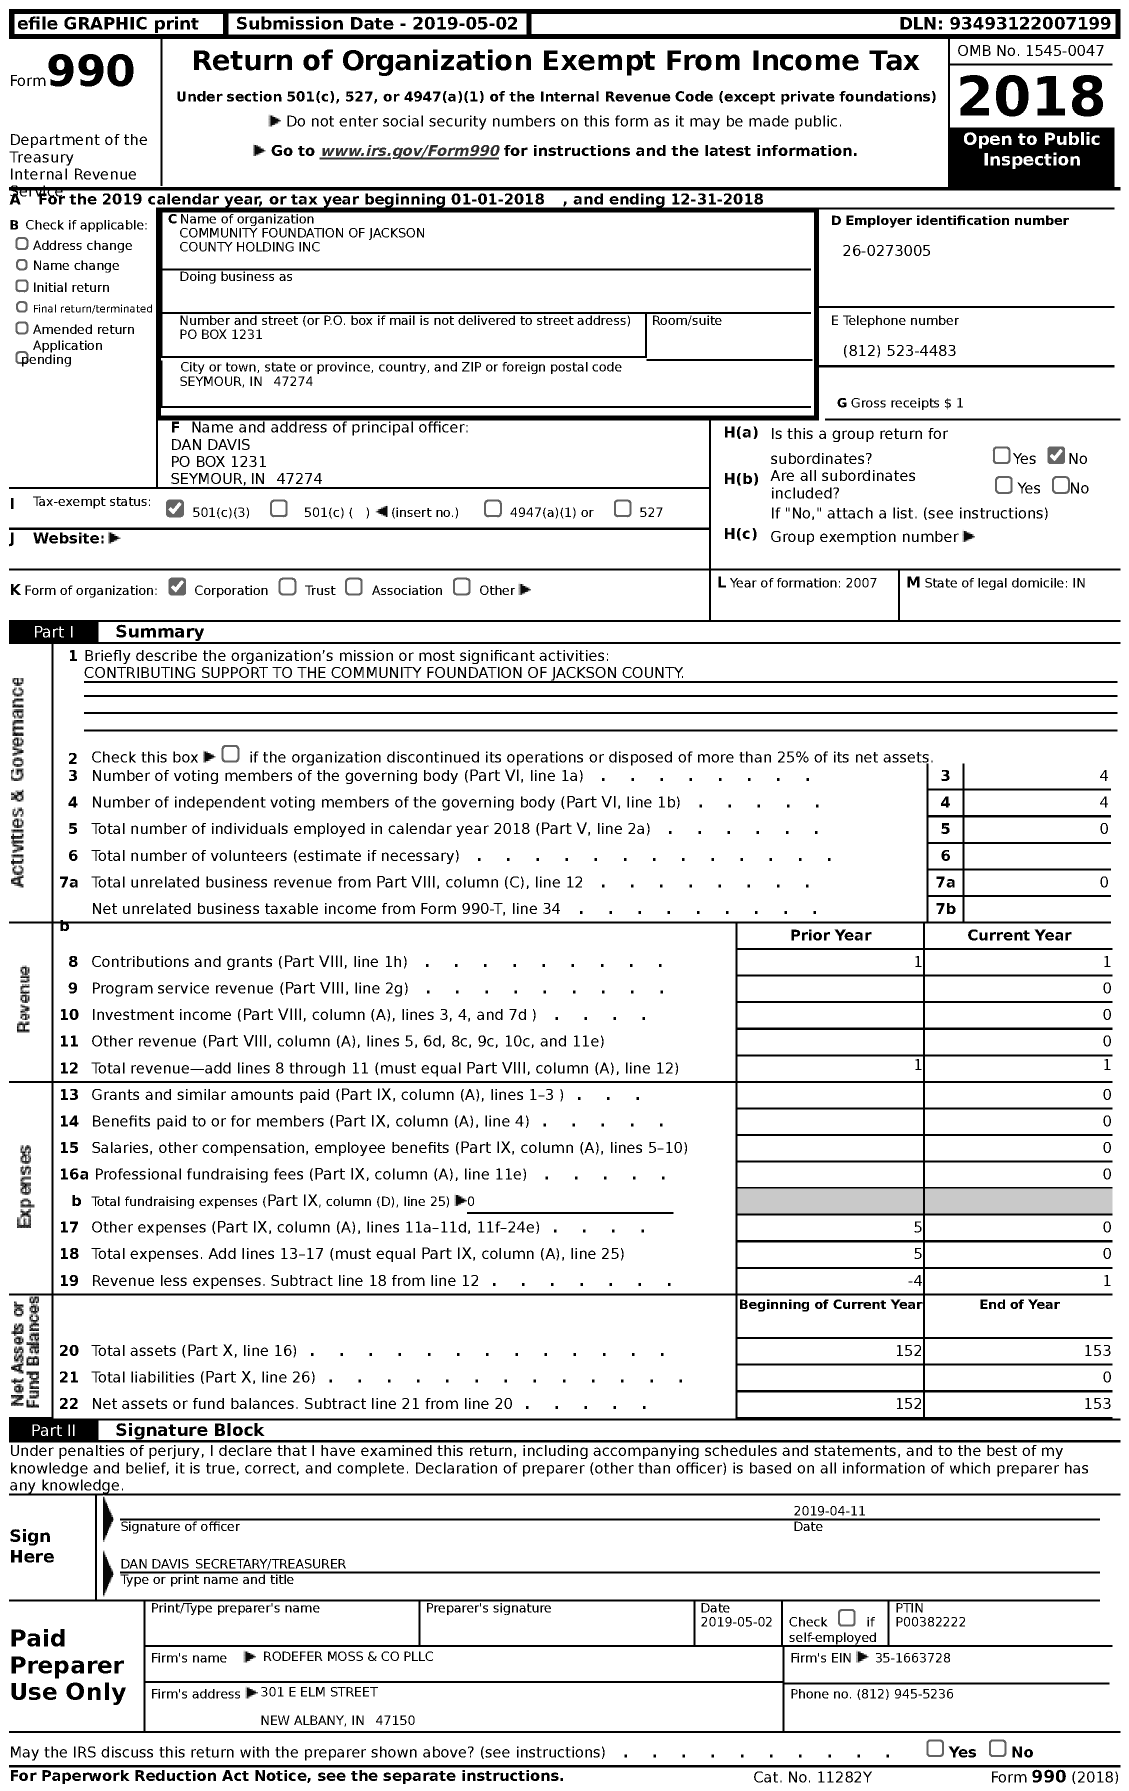 Image of first page of 2018 Form 990 for Community Foundation of Jackson Cty Holding